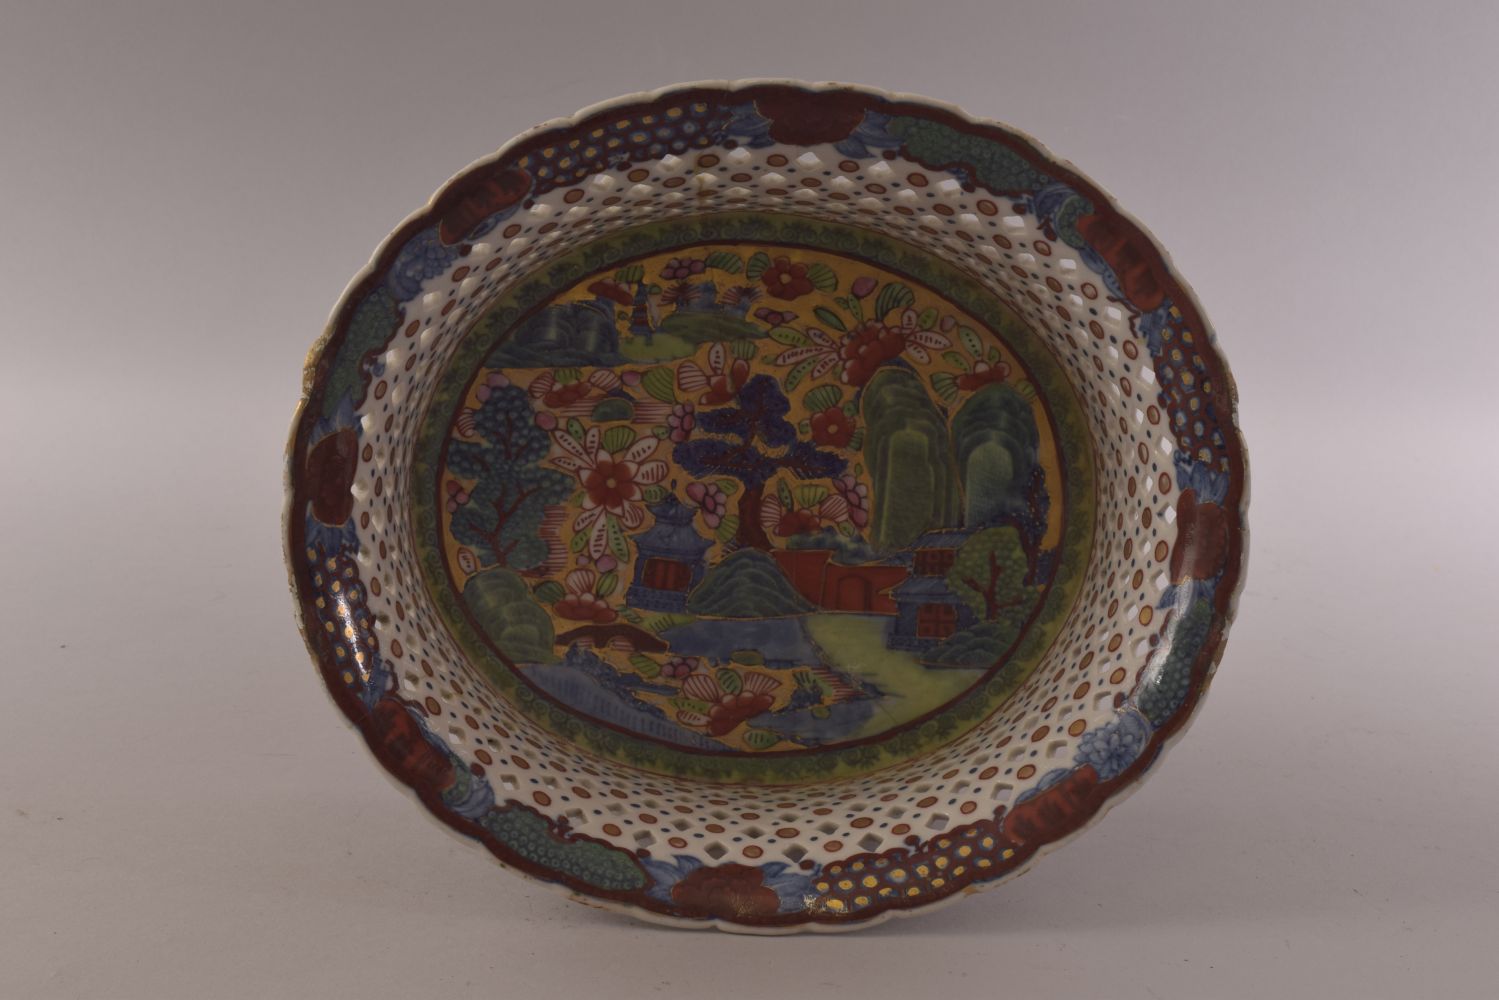 A 19TH CENTURY CHINESE OVAL PIERCED 'CLOBBERED' PORCELAIN BASKET, painted with a landscape, mark - Image 2 of 7